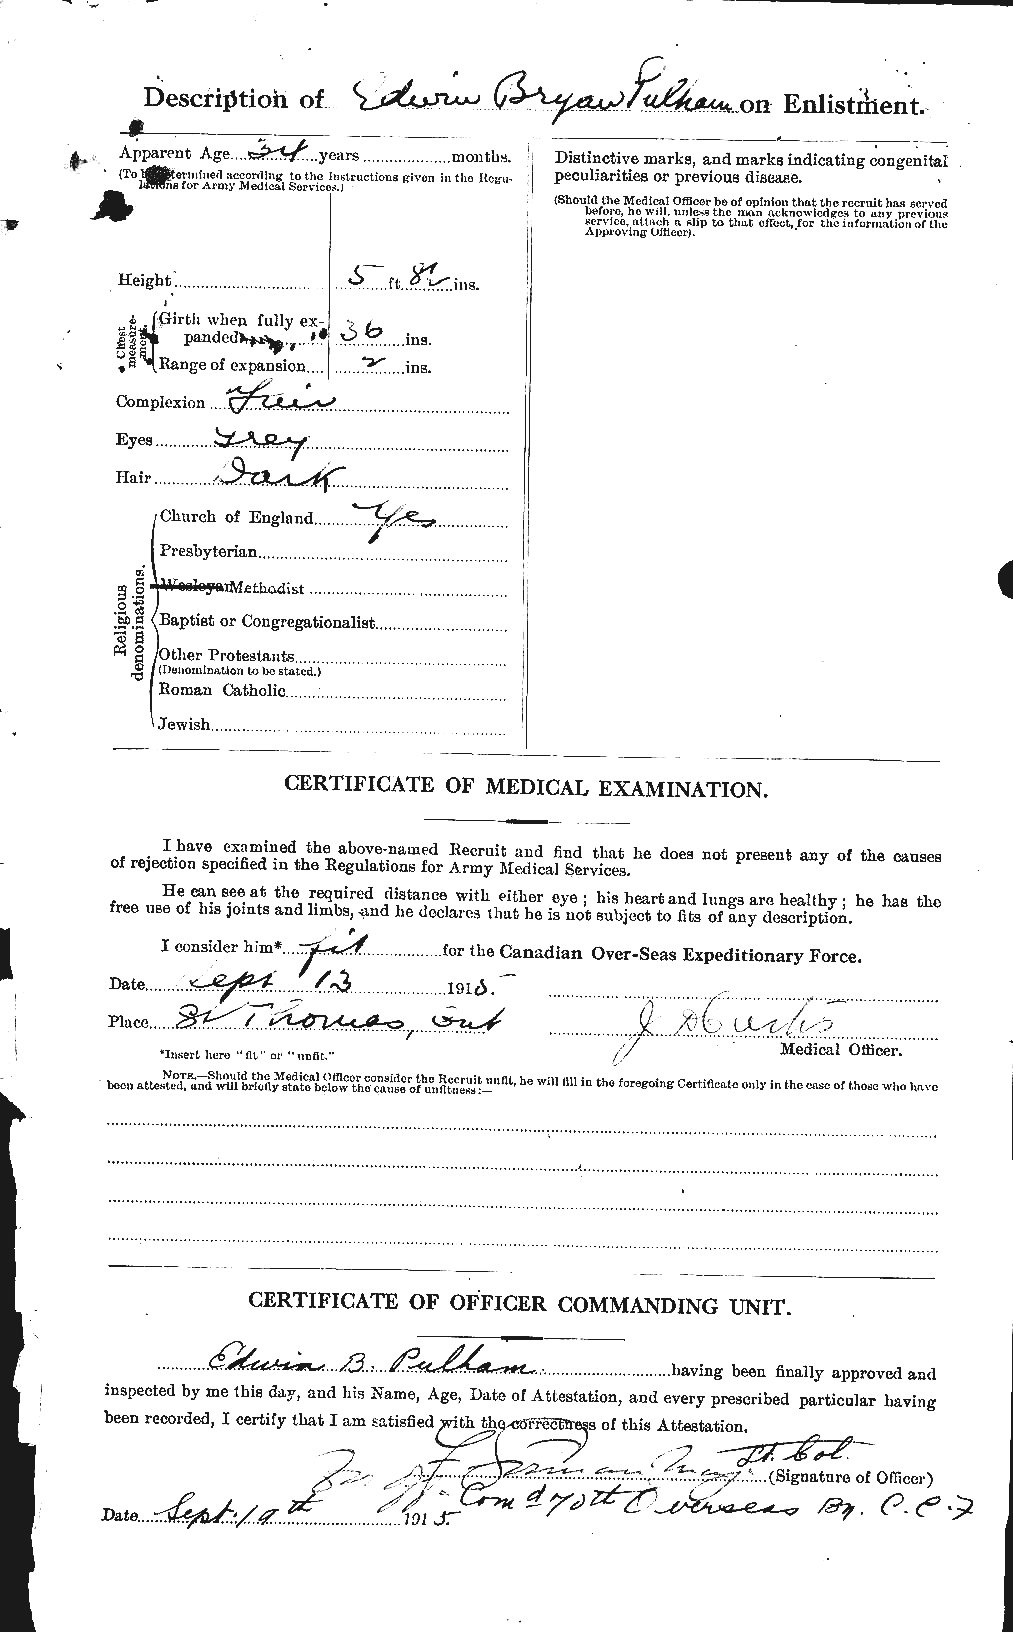 Personnel Records of the First World War - CEF 589526b